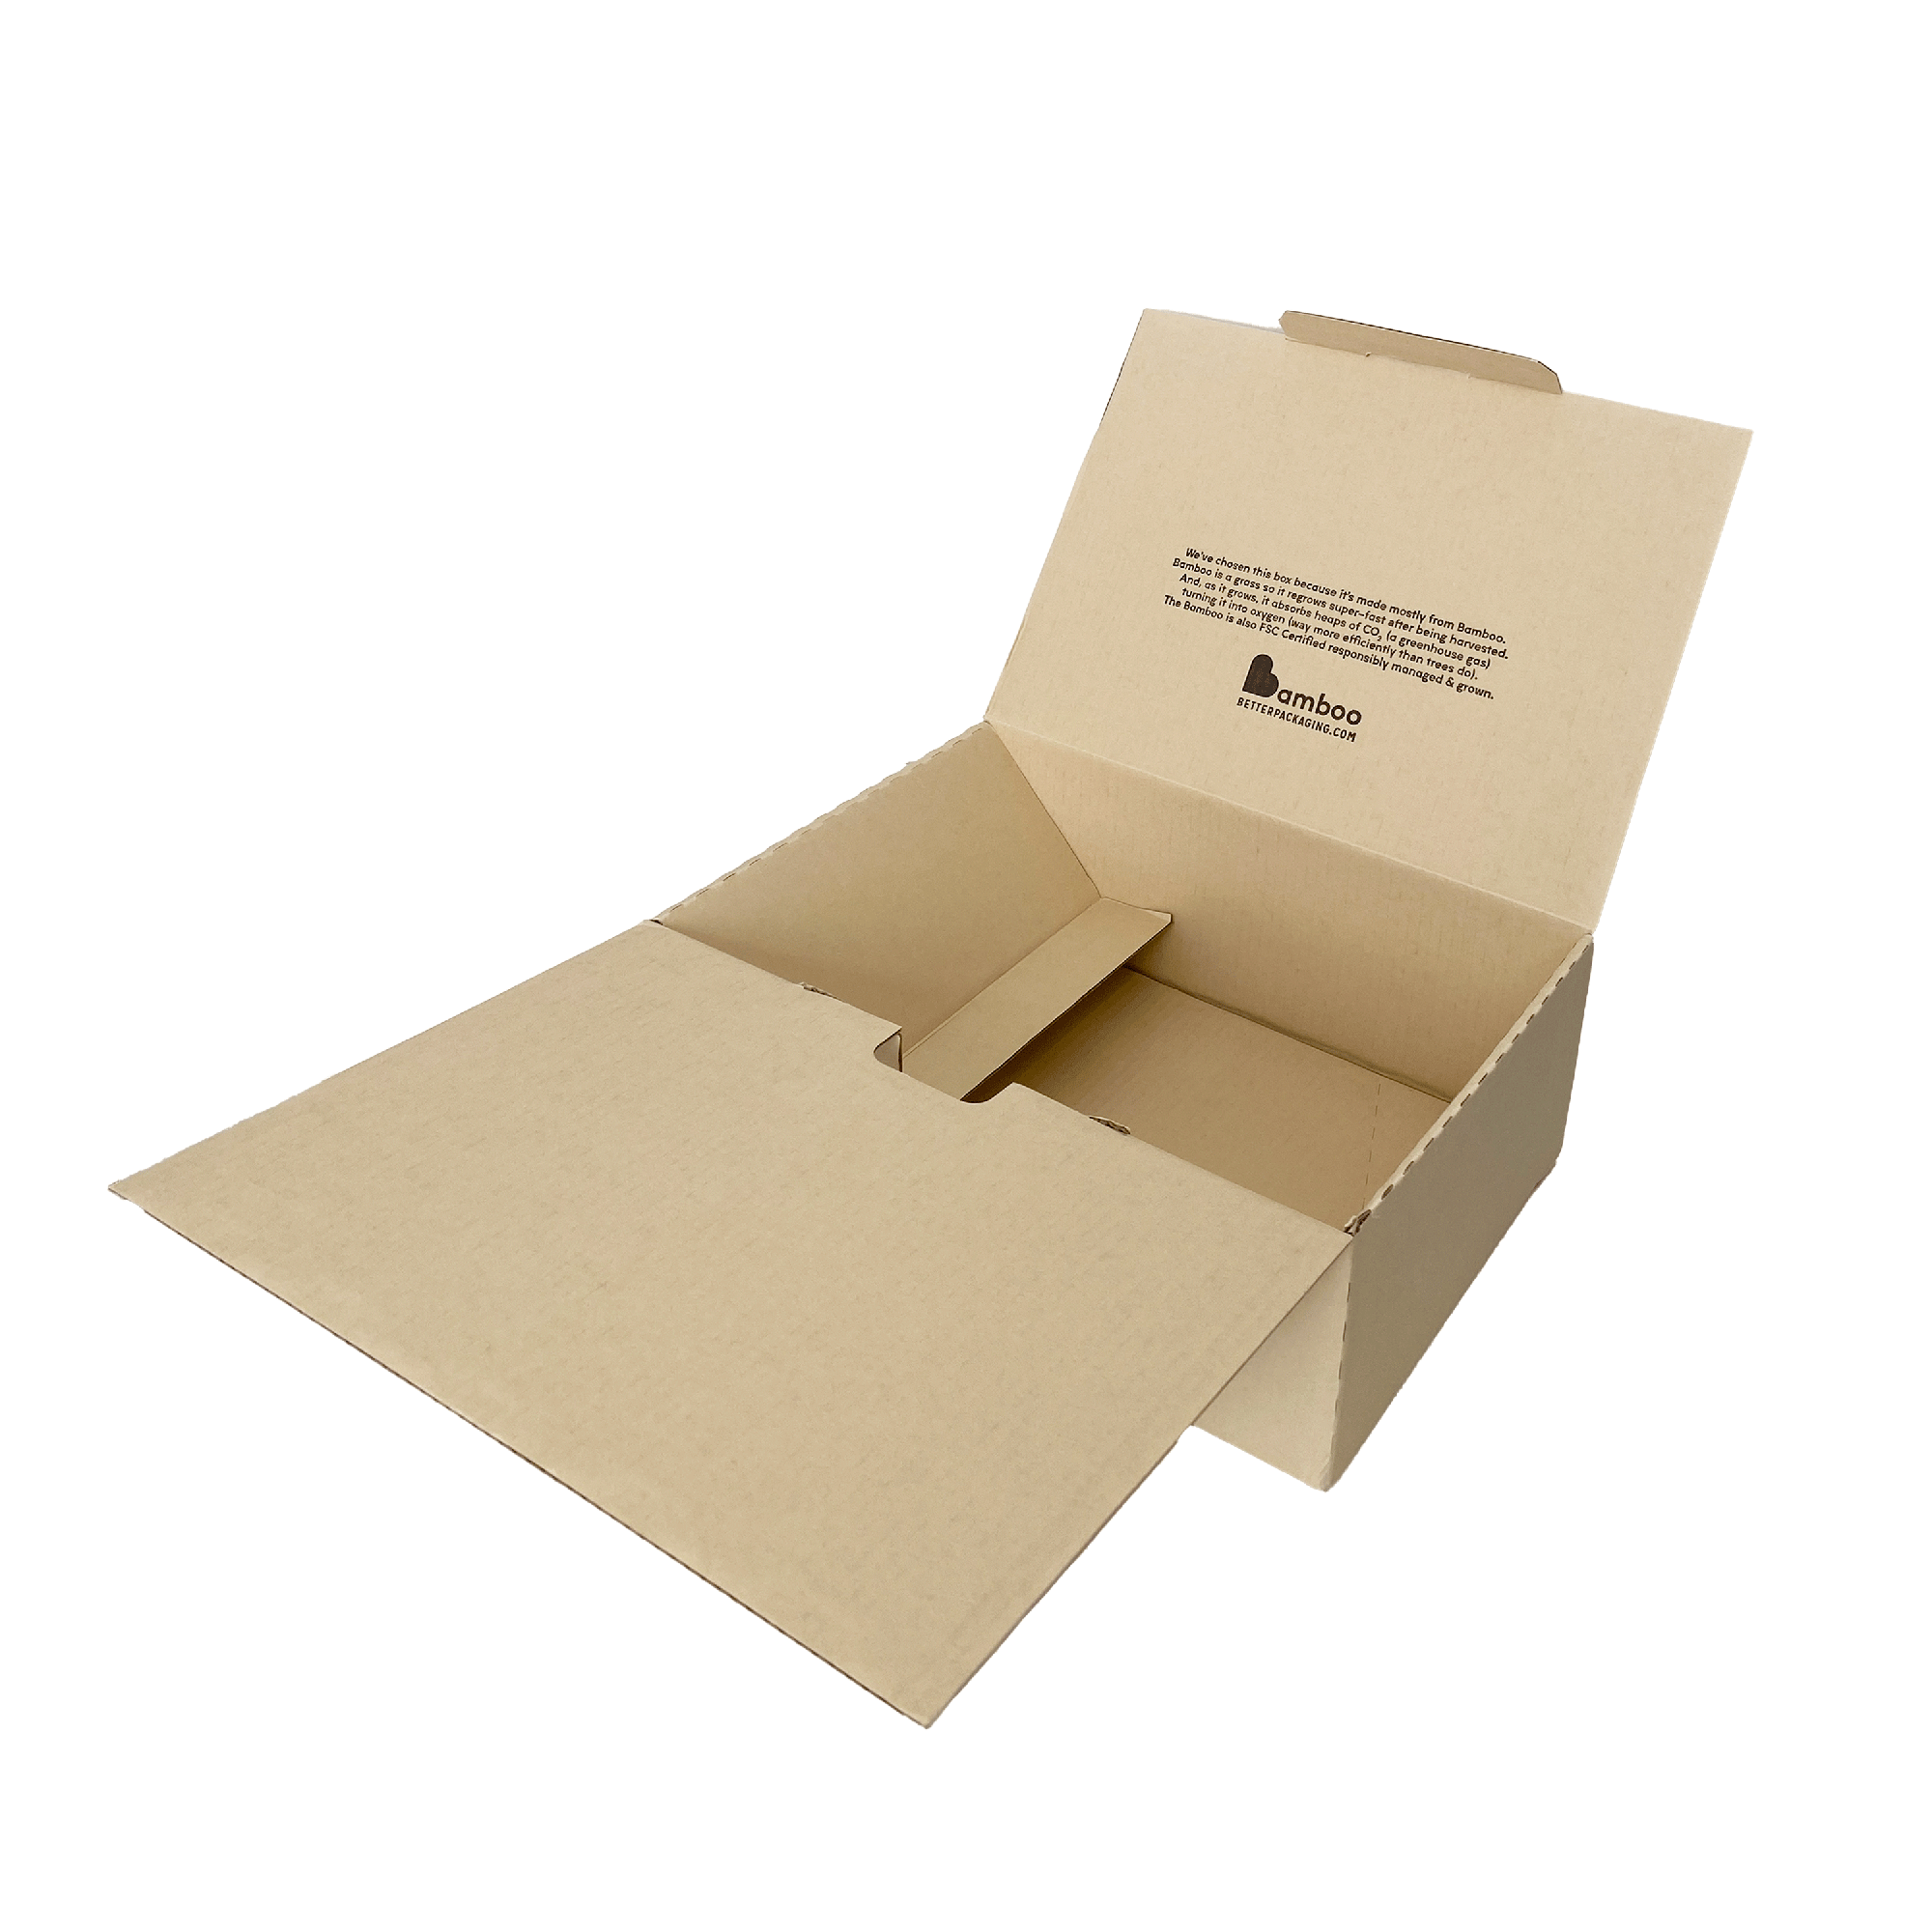 Bamboo Boxes - Better Packaging Co